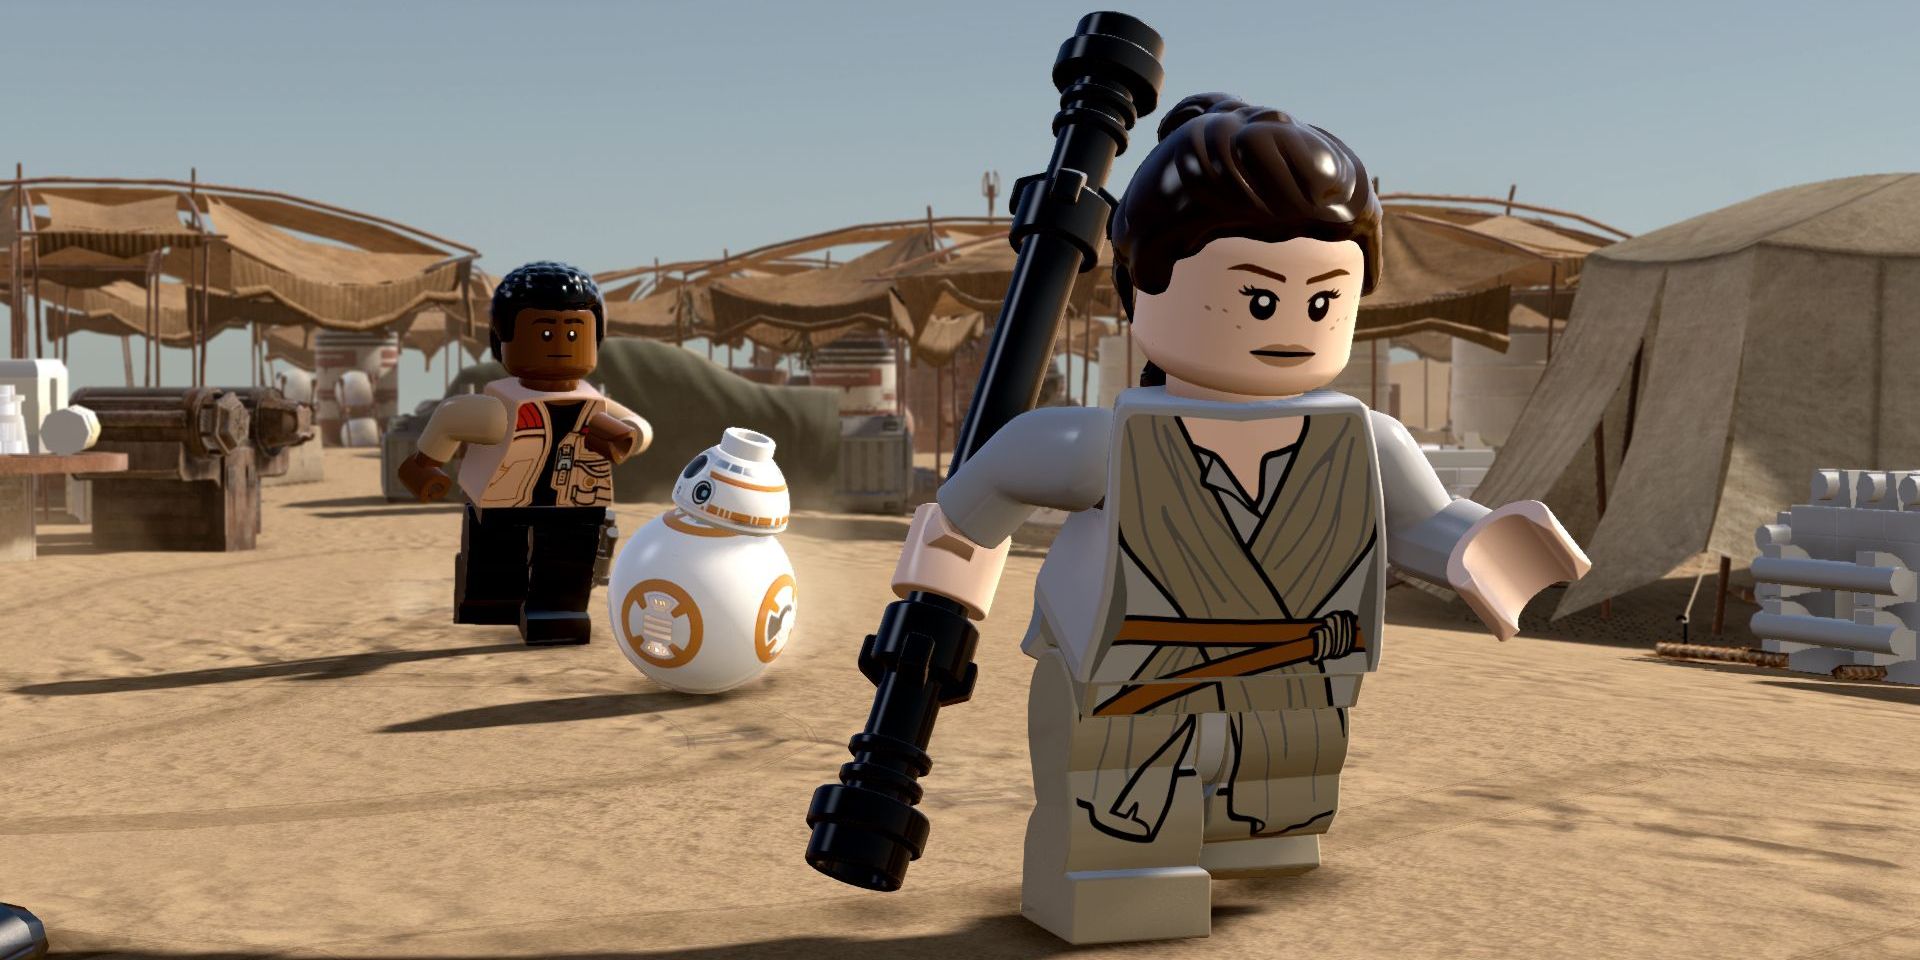 A screenshot of Ray, Finn, and BB8 from LEGO Star Wars The Force Awakens.